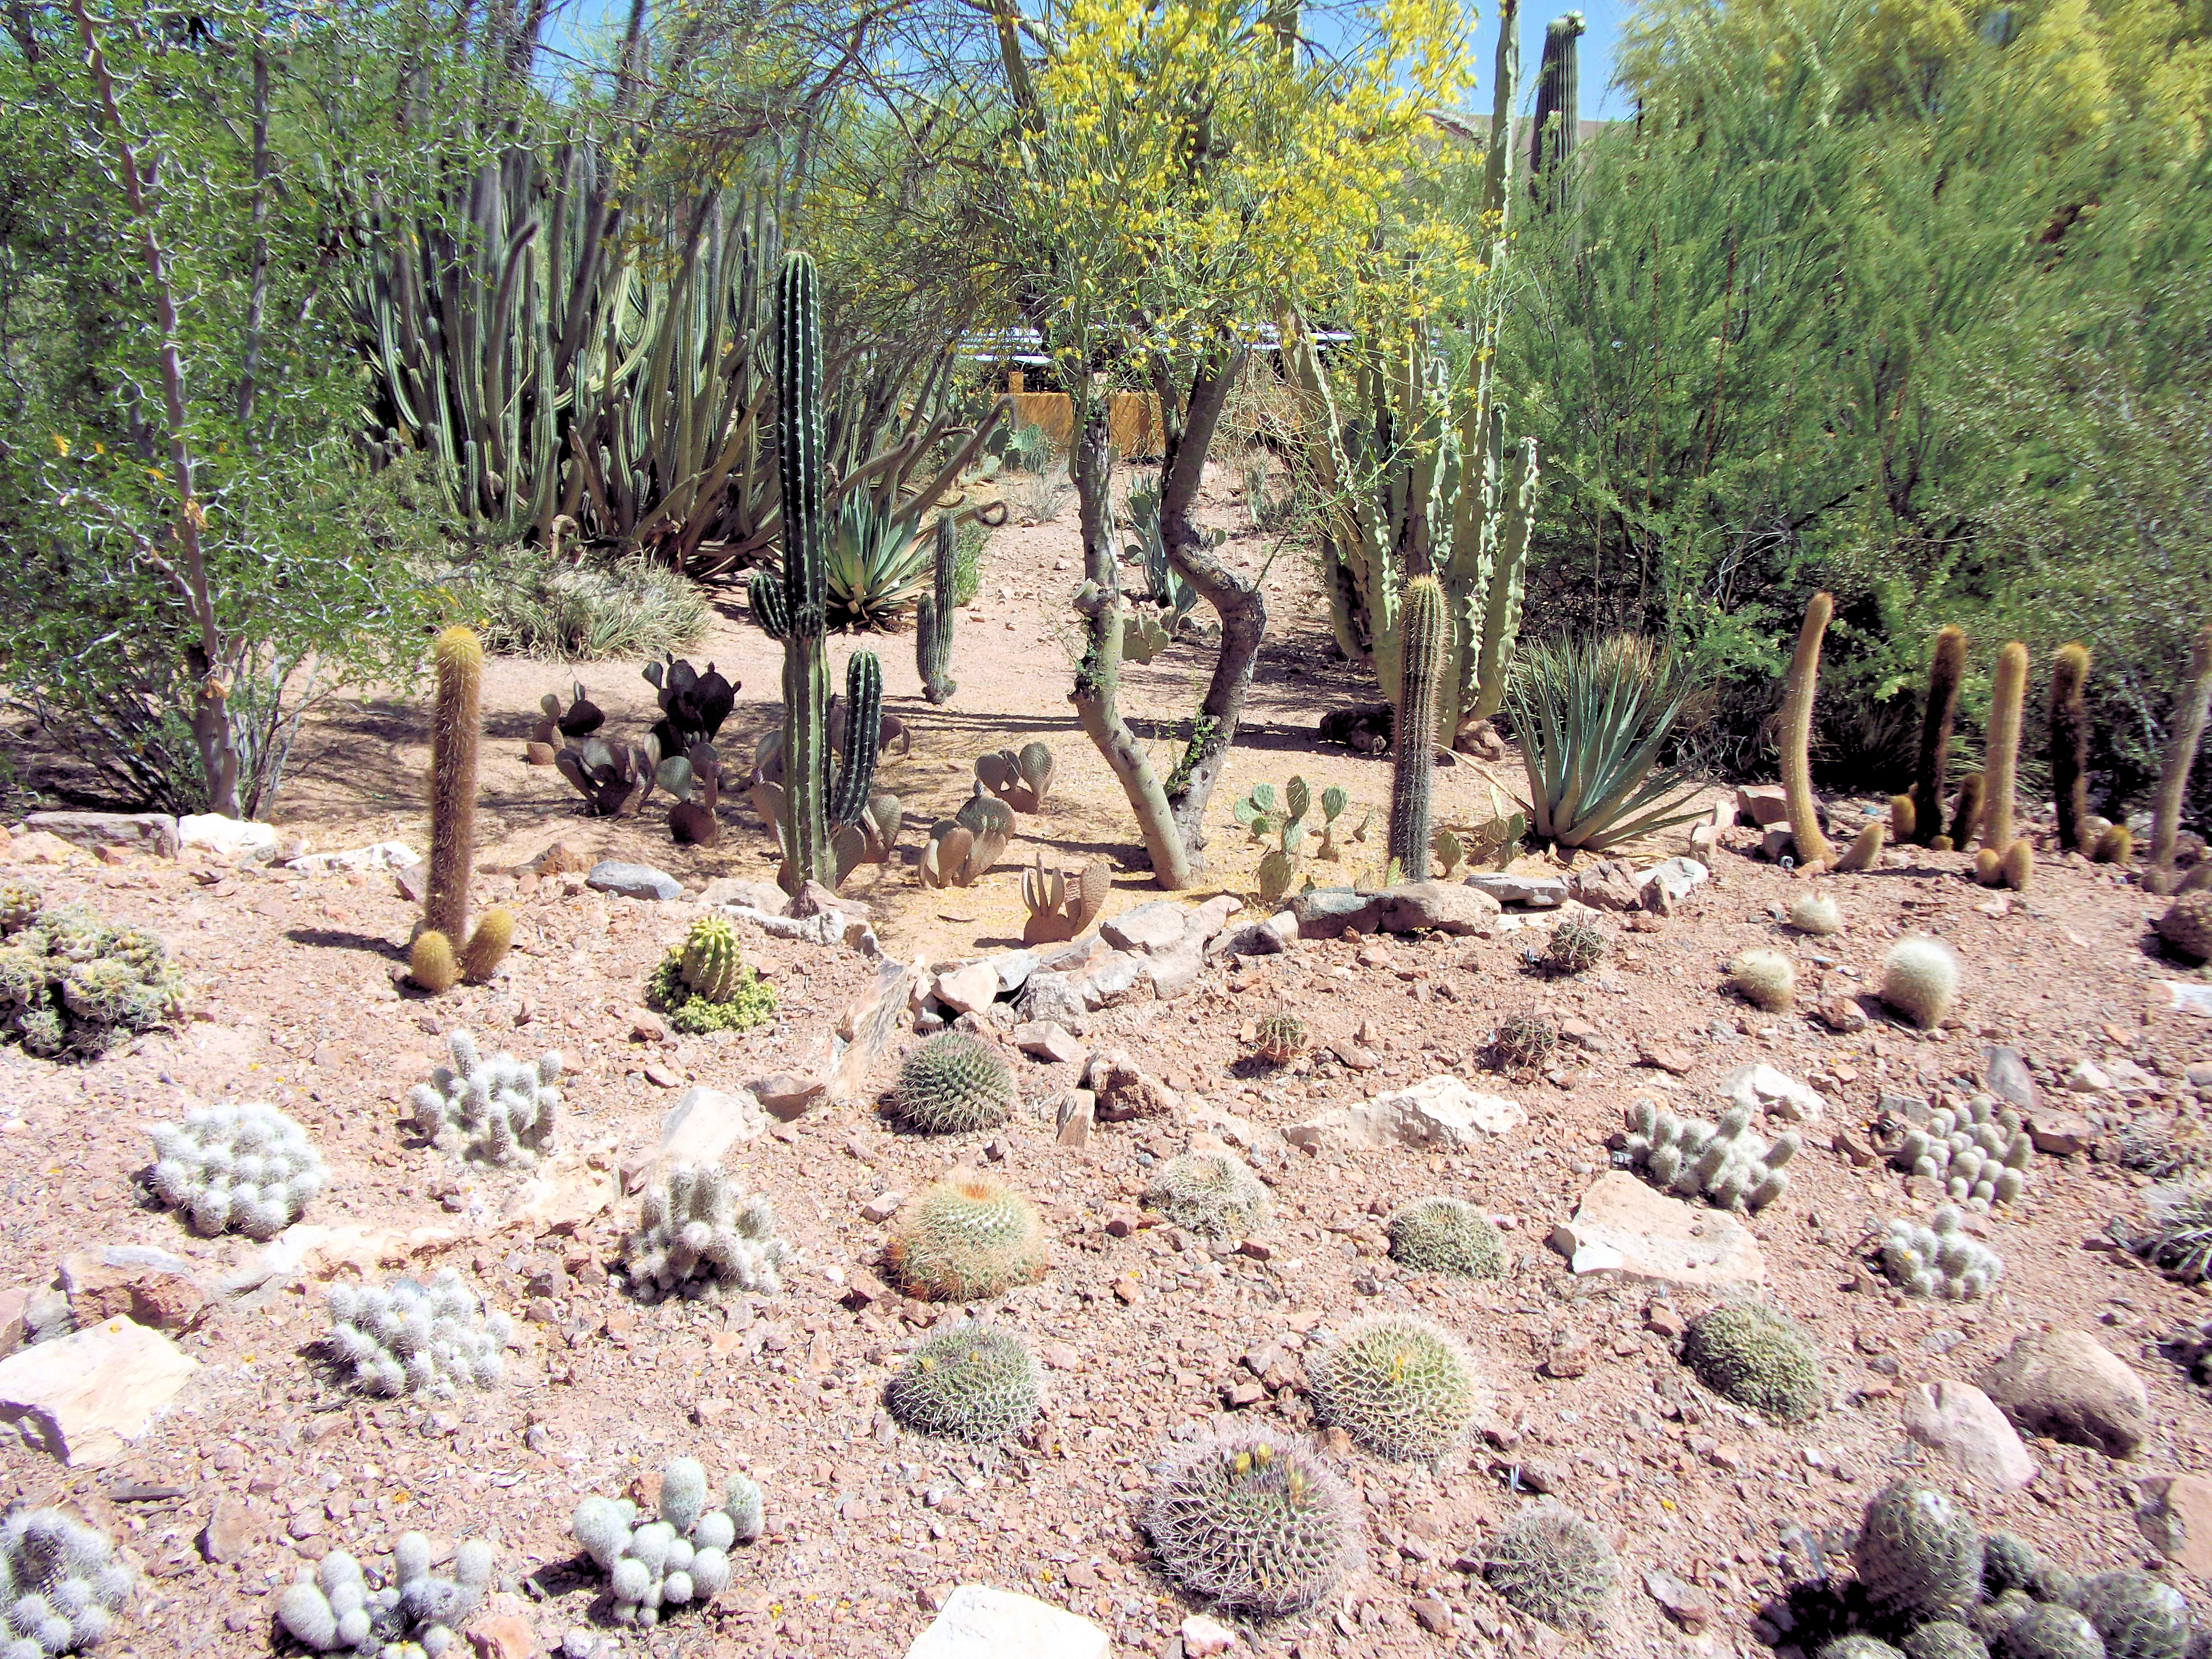 Groomed group of new cacti at the Botanical Garden